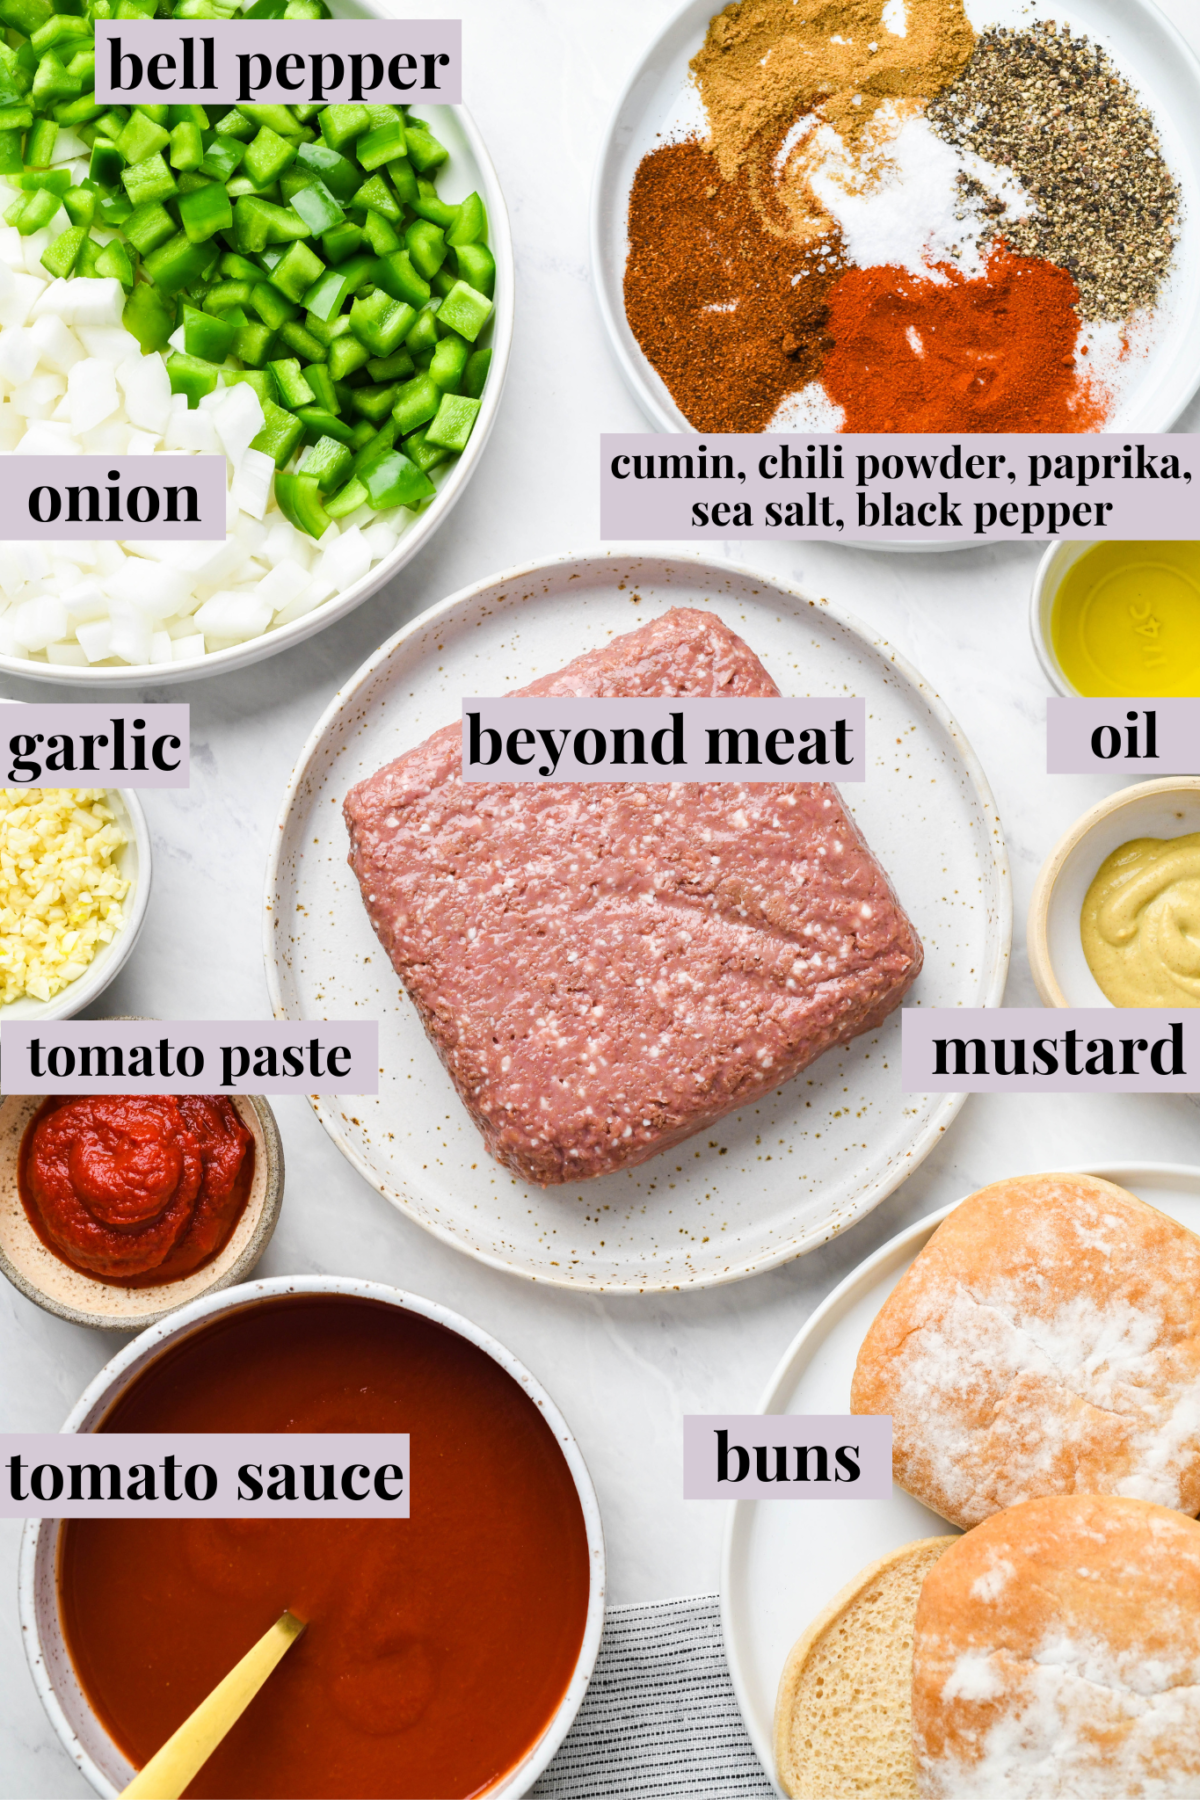 Overhead view of labeled, uncooked ingredients for vegan sloppy joes: Beyond meat, onions, bell peppers, garlic, cumin, chili powder, paprika, sea salt, black pepper, mustard, tomato paste, tomato sauce, oil, and buns